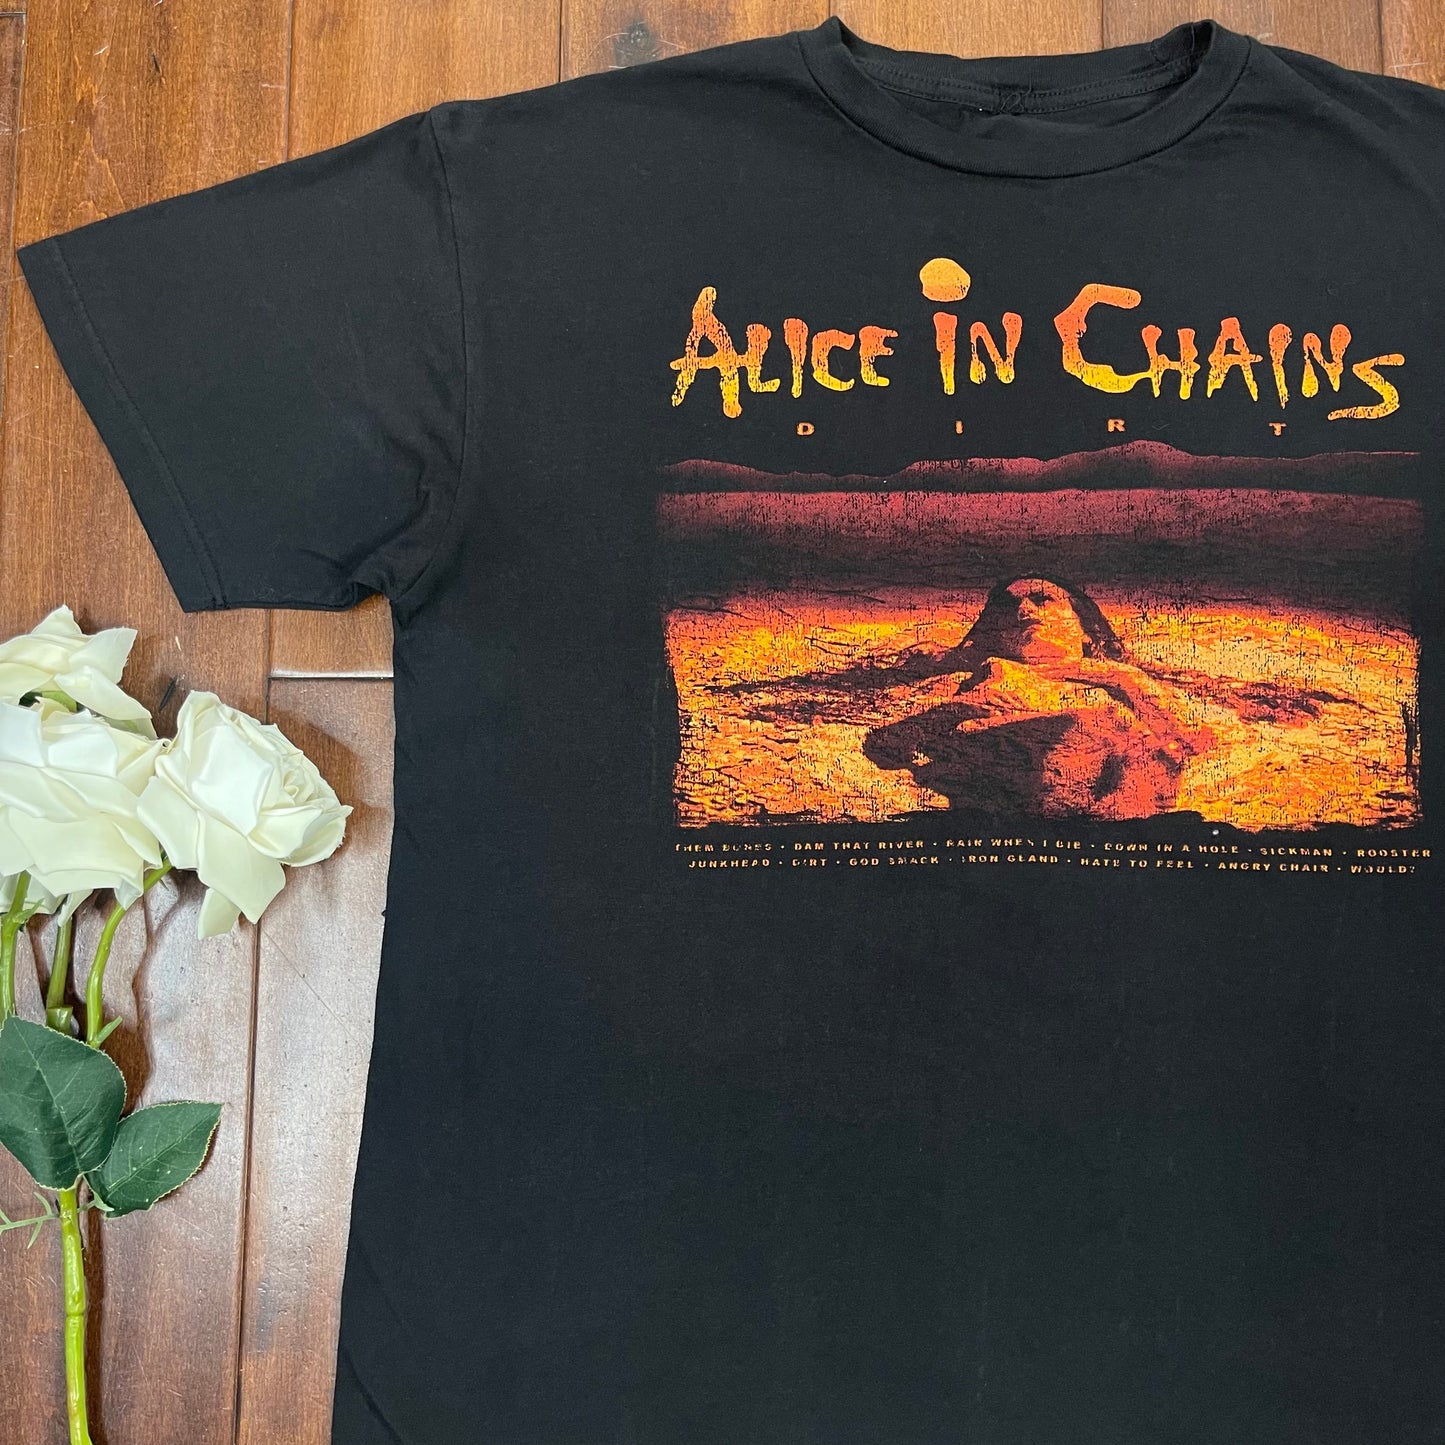 THRIFTED “ALICE IN CHAINS” T-SHIRT